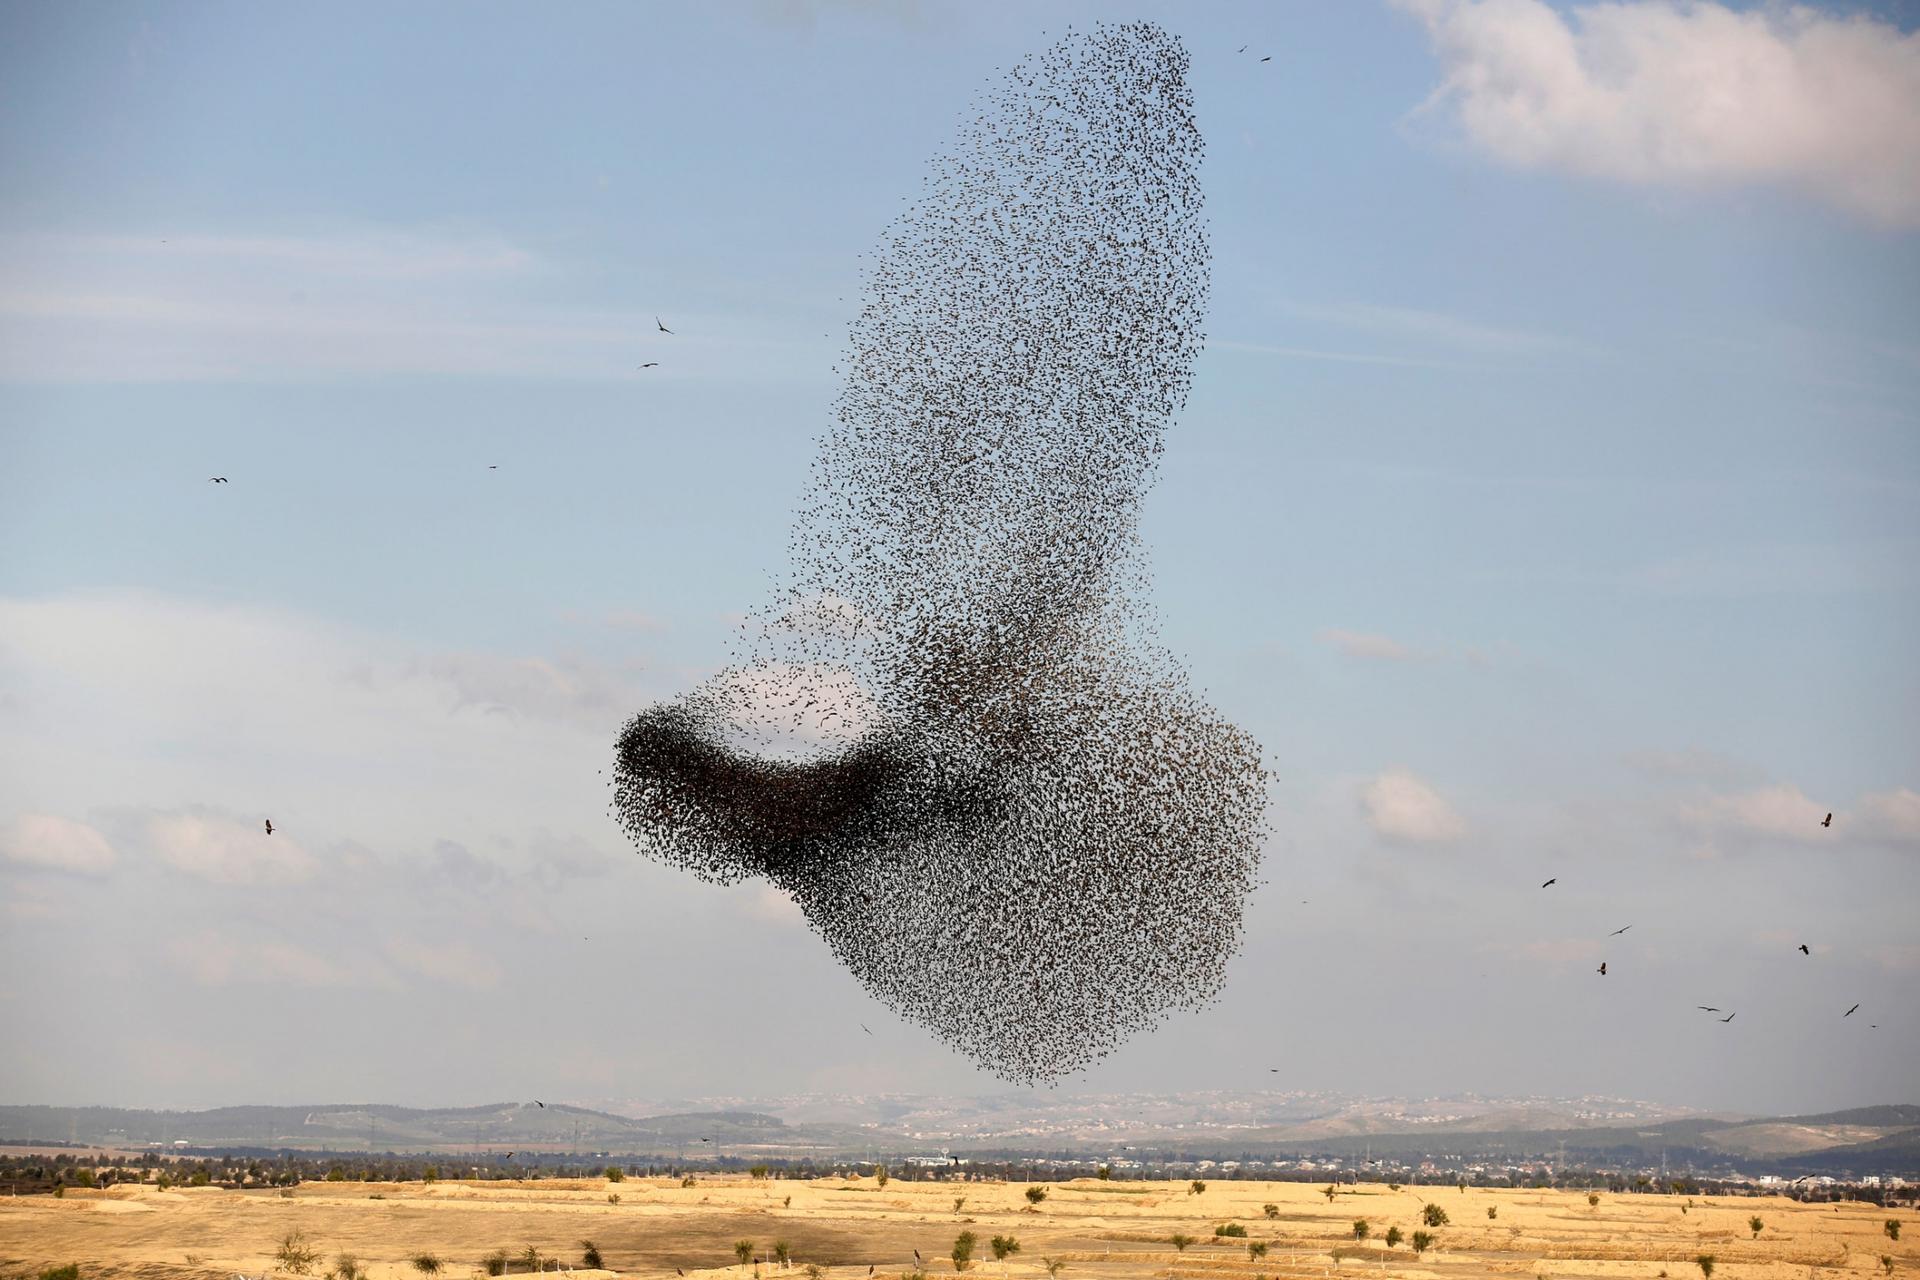 A murmuration of migrating starlings is seen across the sky near the village of Beit Kama in southern Israel.